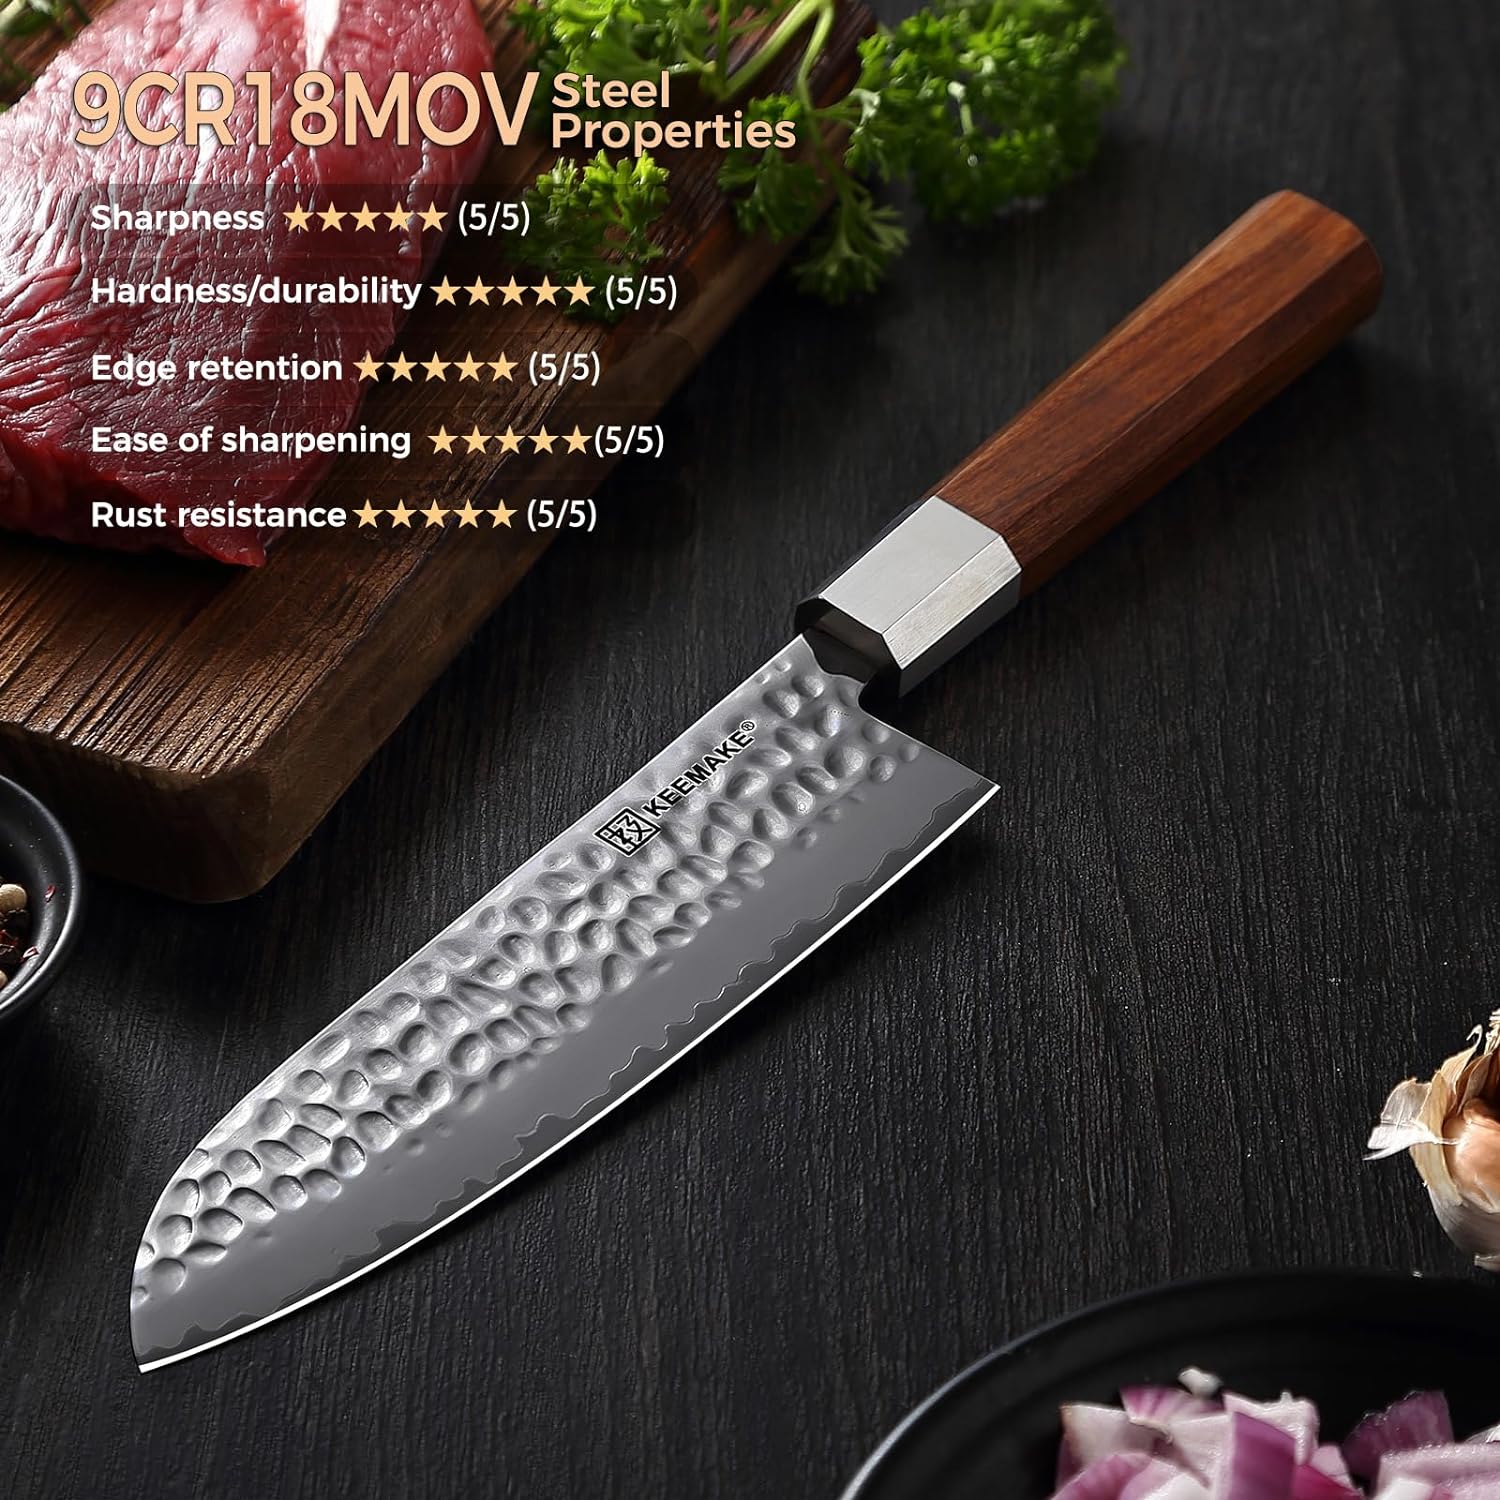 KEEMAKE Kitchen Knife Set of 3pcs, Chef Knife Set with 3-layer Japanese 9CR18MOV Clad Steel Blade